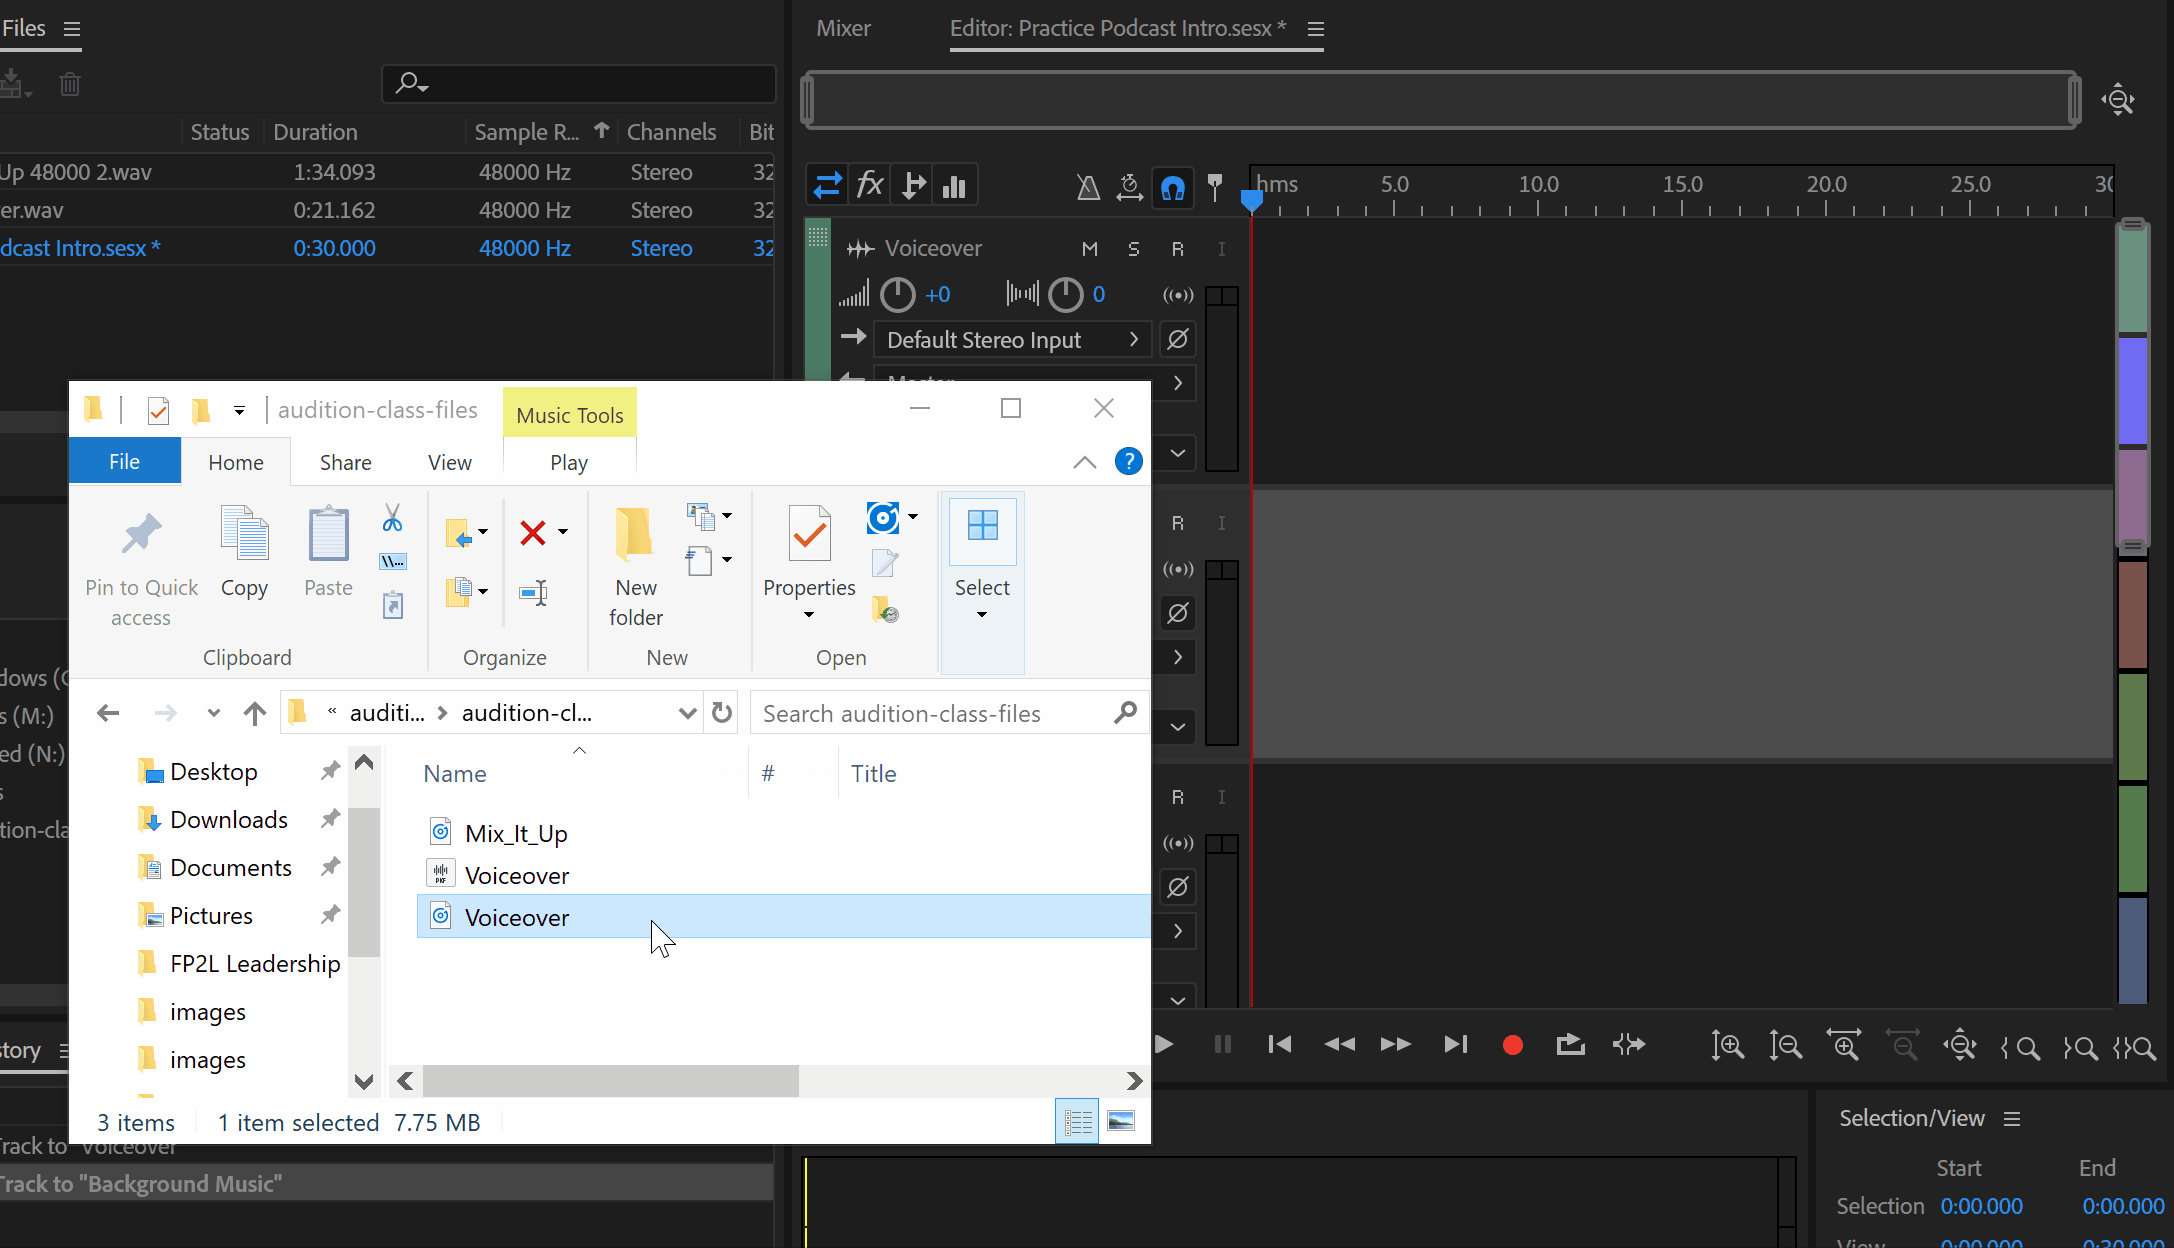 gif showing how to import files using the file explorer in windows(finder on mac) by simply dragging to a track on the editor panel